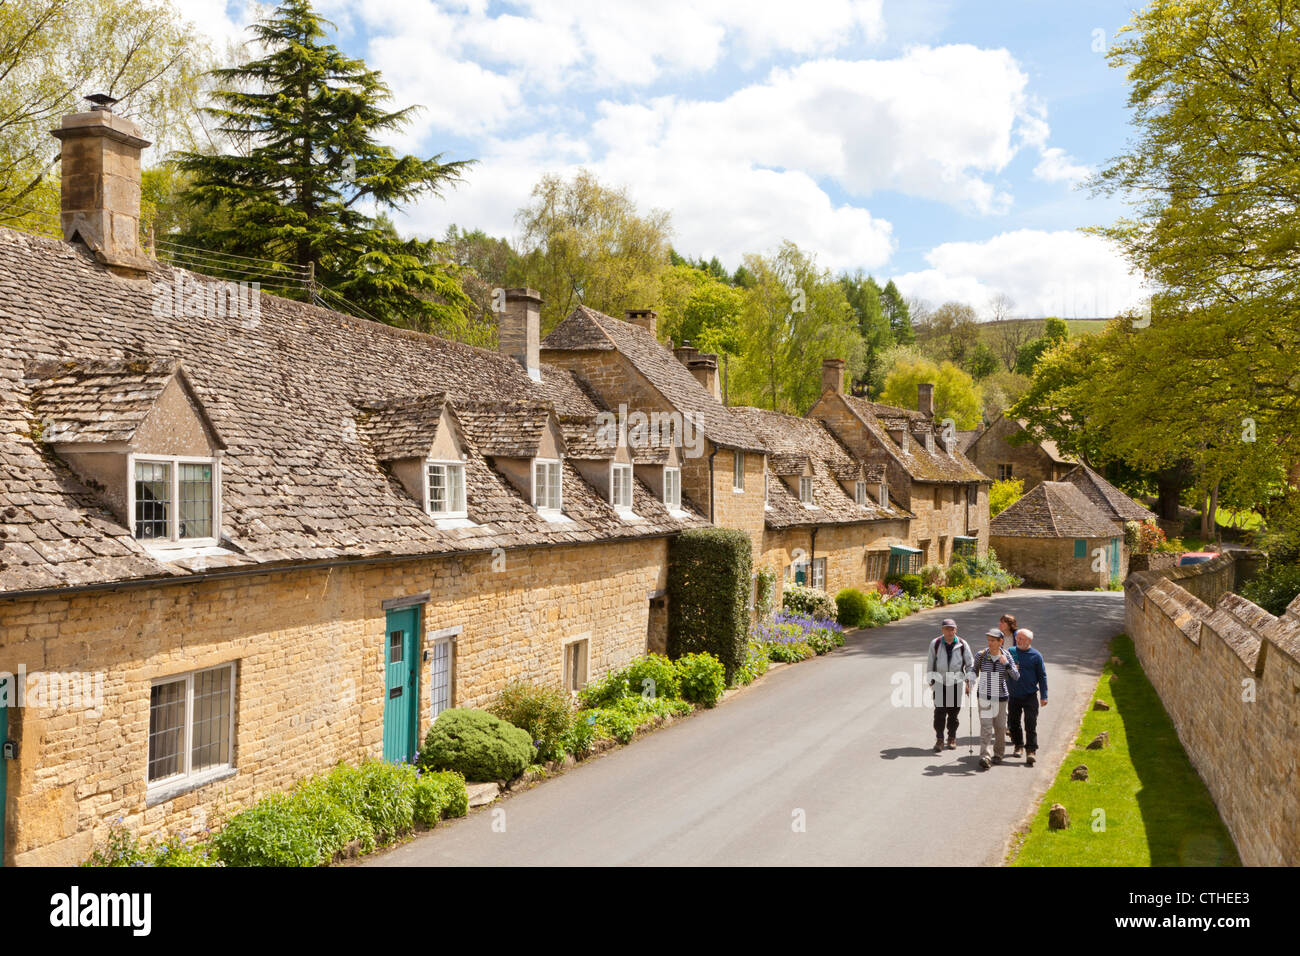 Hikers enjoying the stone cottages beside the lane in the Cotswold village of Snowshill, Gloucestershire UK Stock Photo